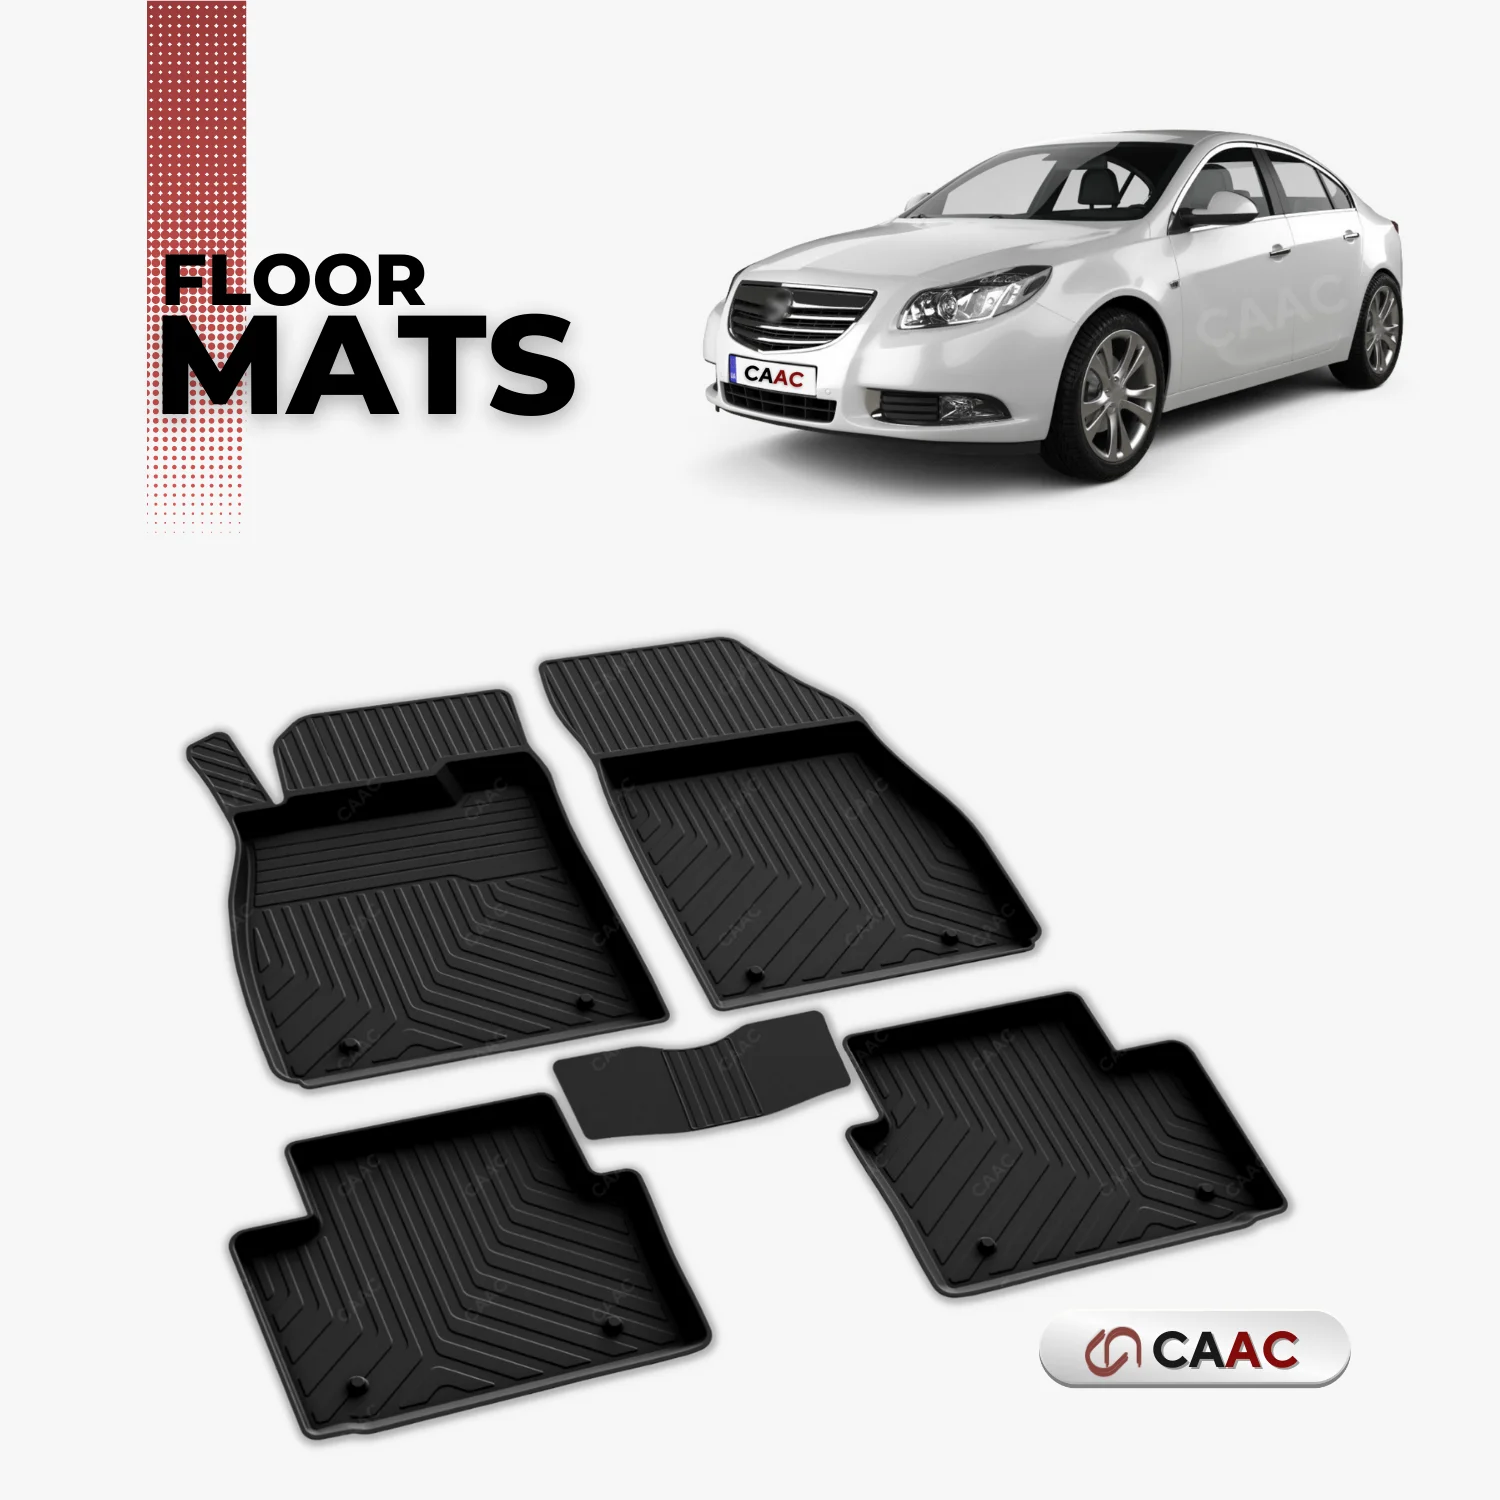 

For Opel Insignia SD 2008-2016 Floor Mats Lining All Air Molded 4D Black 5 Piece Custom Assembly Car Accessory Design Ornament